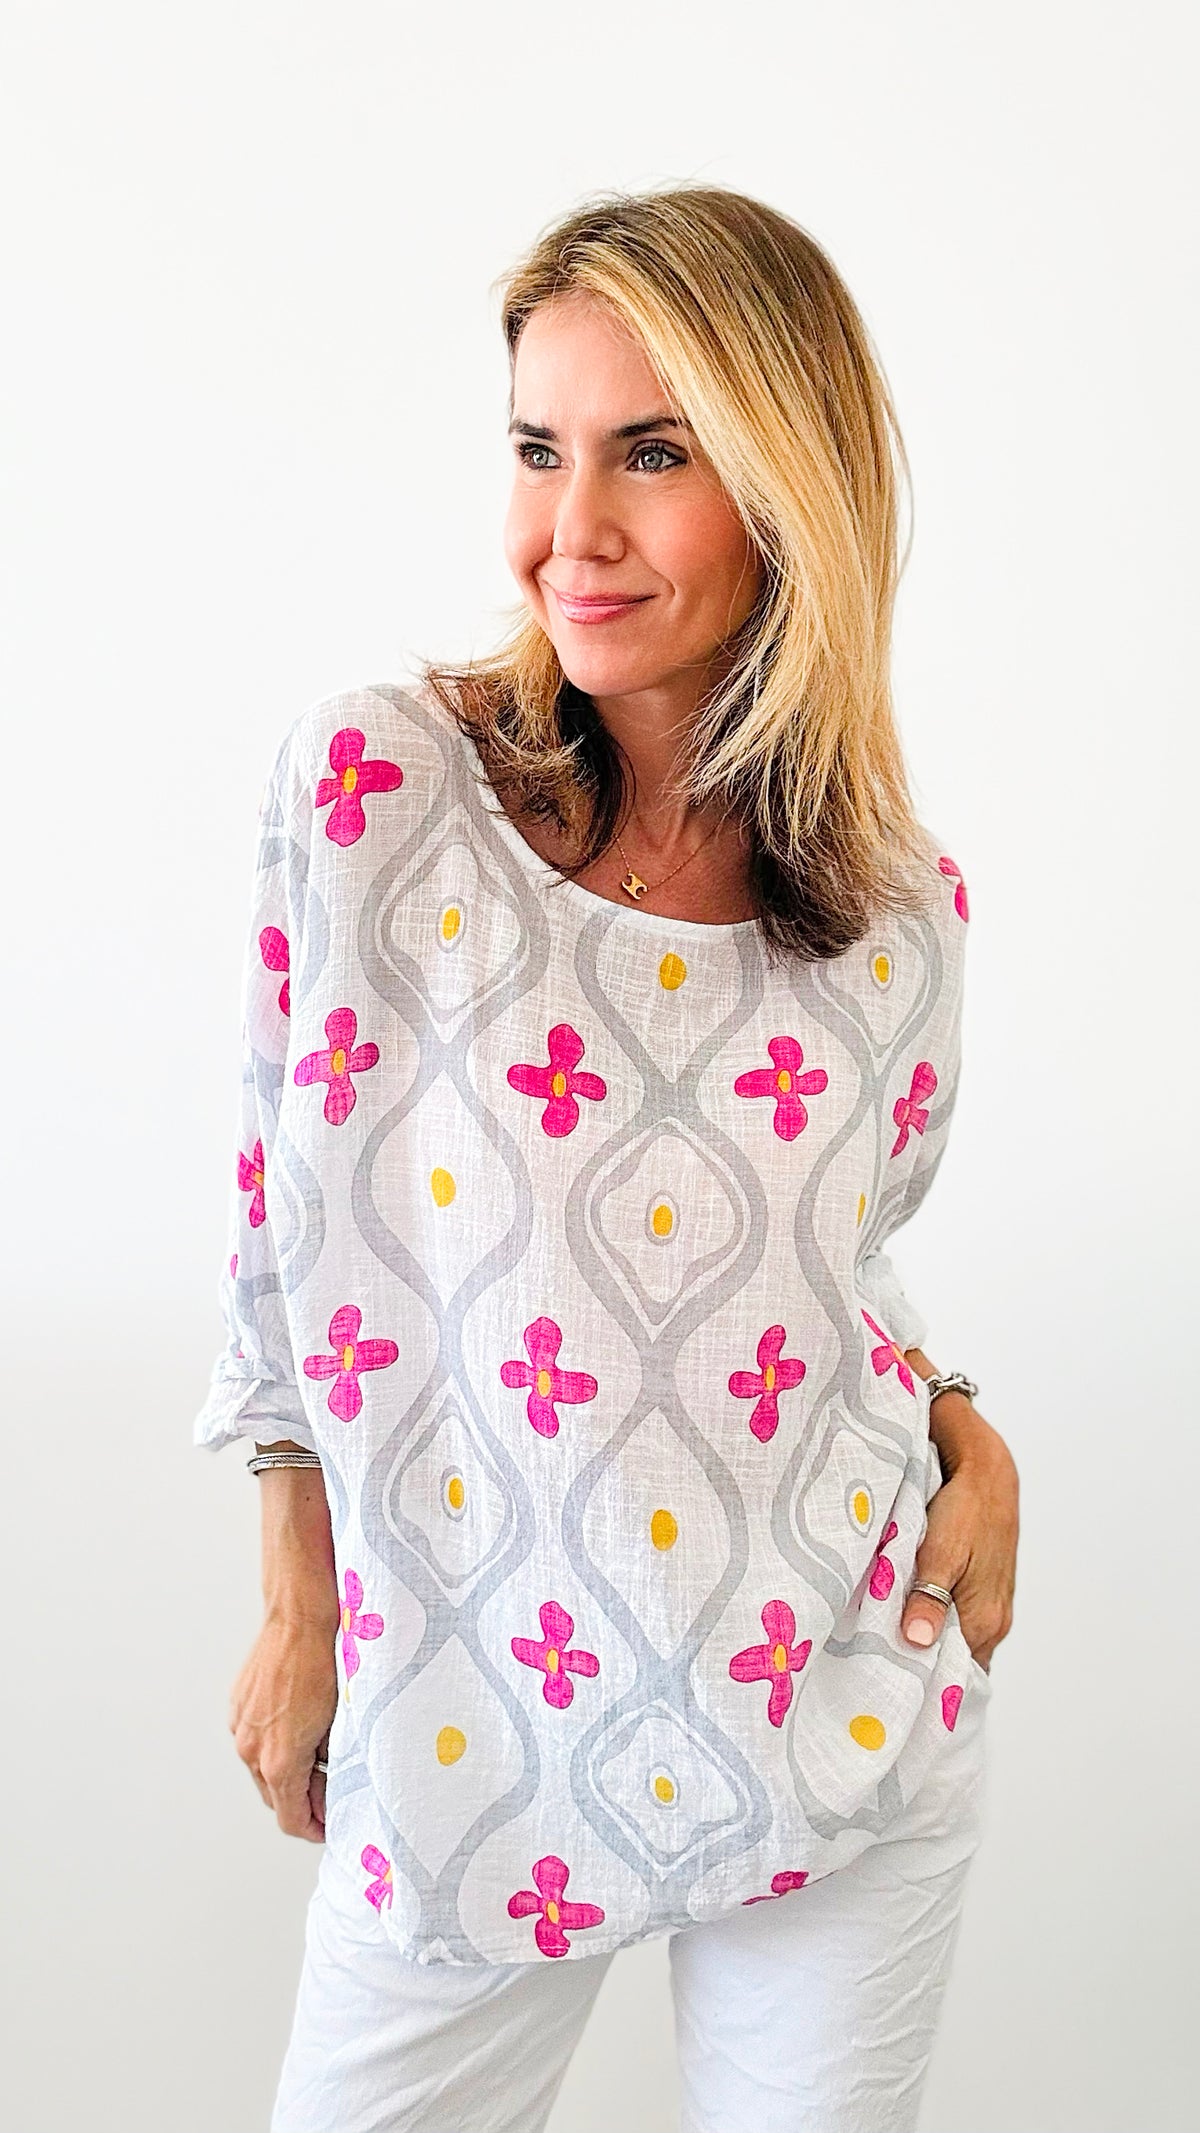 Flower Power Italian Linen Top - White-100 Sleeveless Tops-Italianissimo-Coastal Bloom Boutique, find the trendiest versions of the popular styles and looks Located in Indialantic, FL